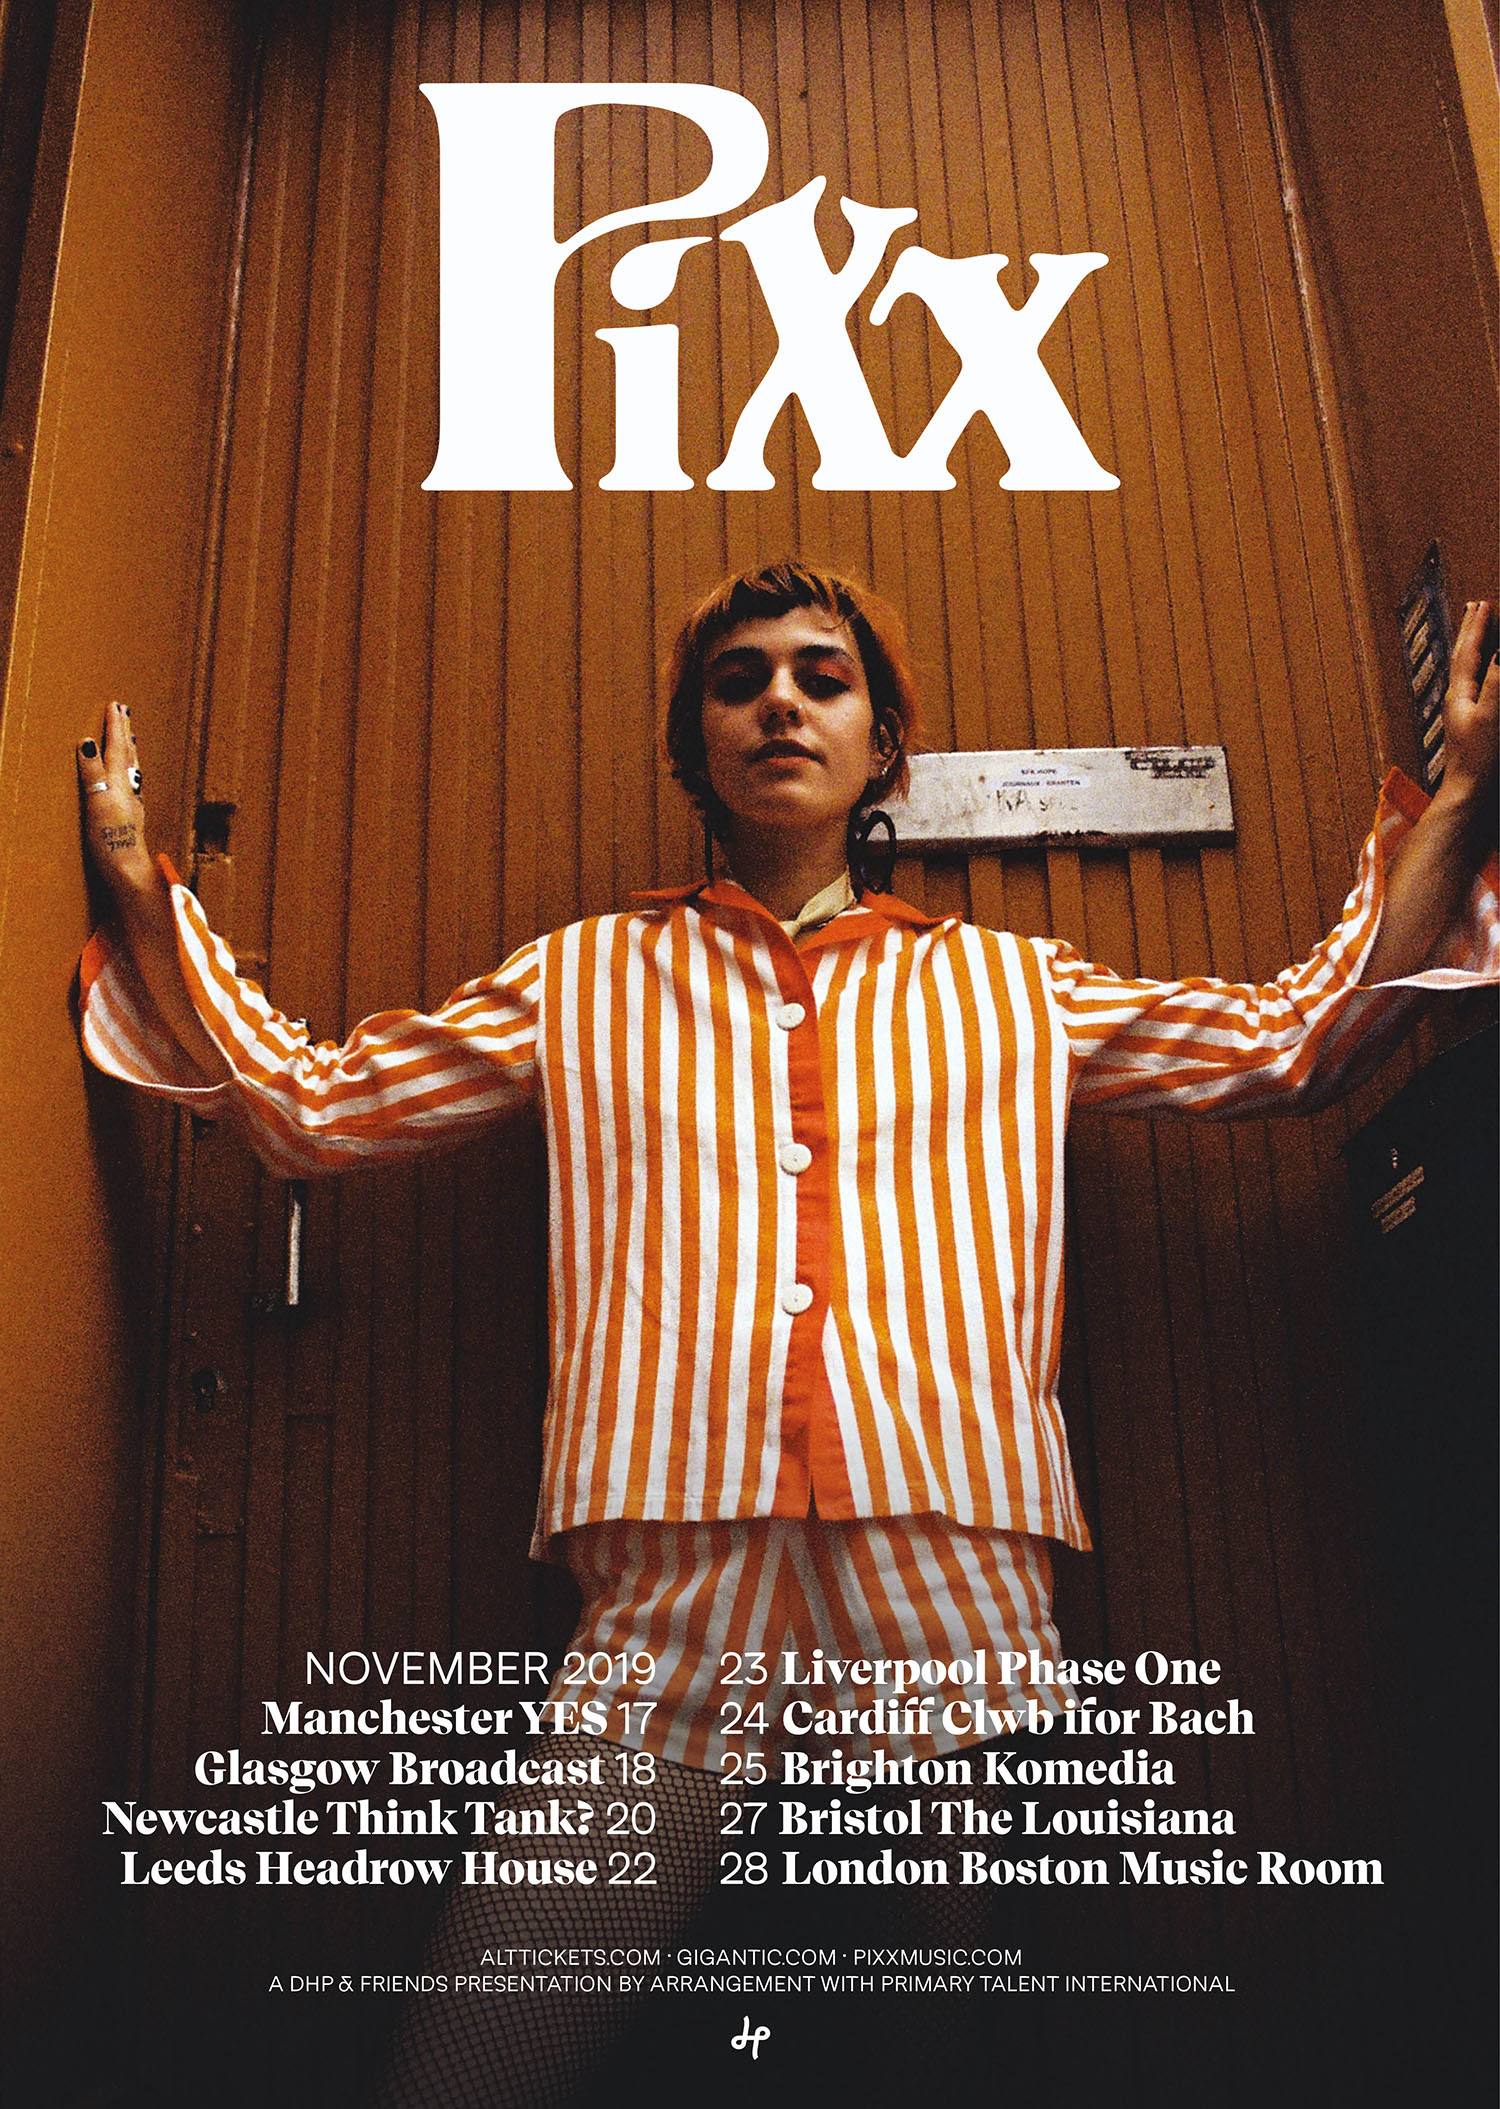 Pixx Shares New Uk Tour Dates Tickets On Sale Now Withguitars